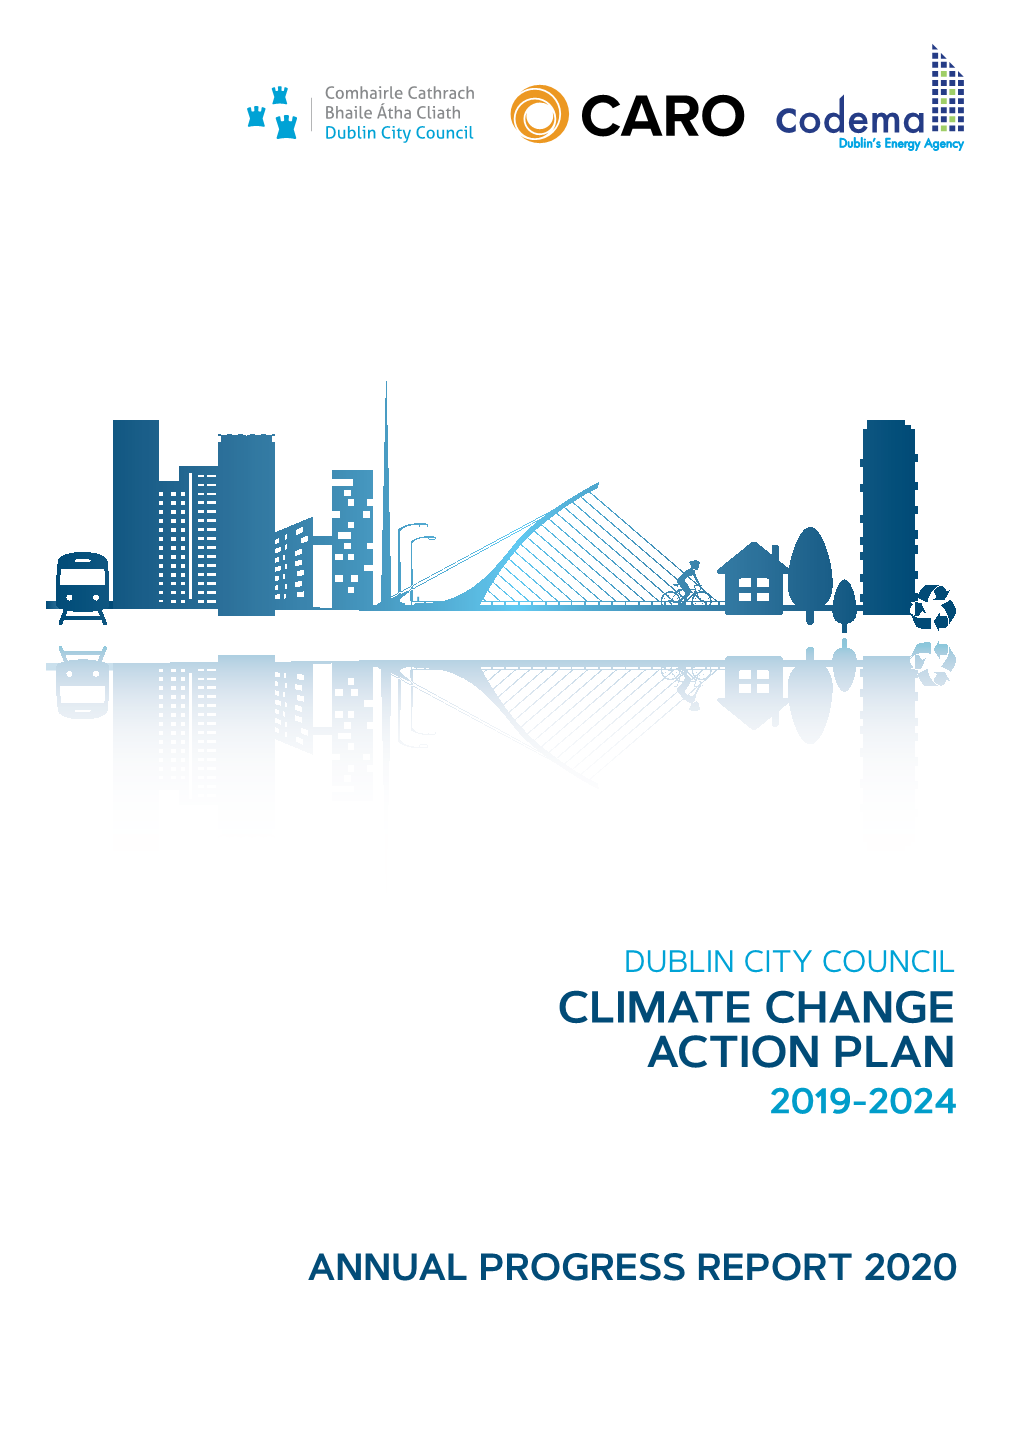 Climate Change Action Plan 2019-2024